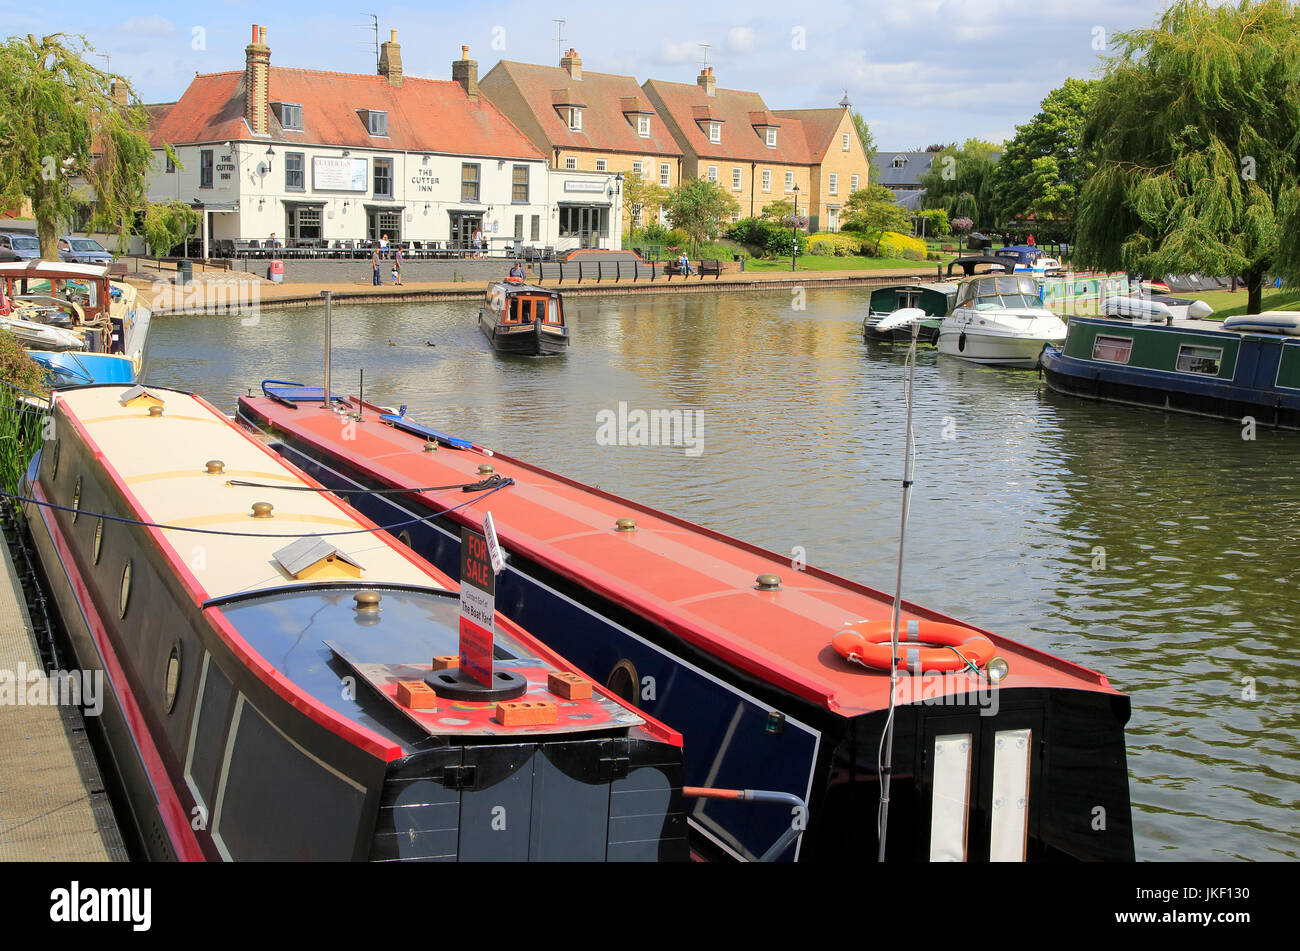 Schmale Boote auf dem Fluss Great Ouse, Ely, Cambridgeshire, England, UK Stockfoto